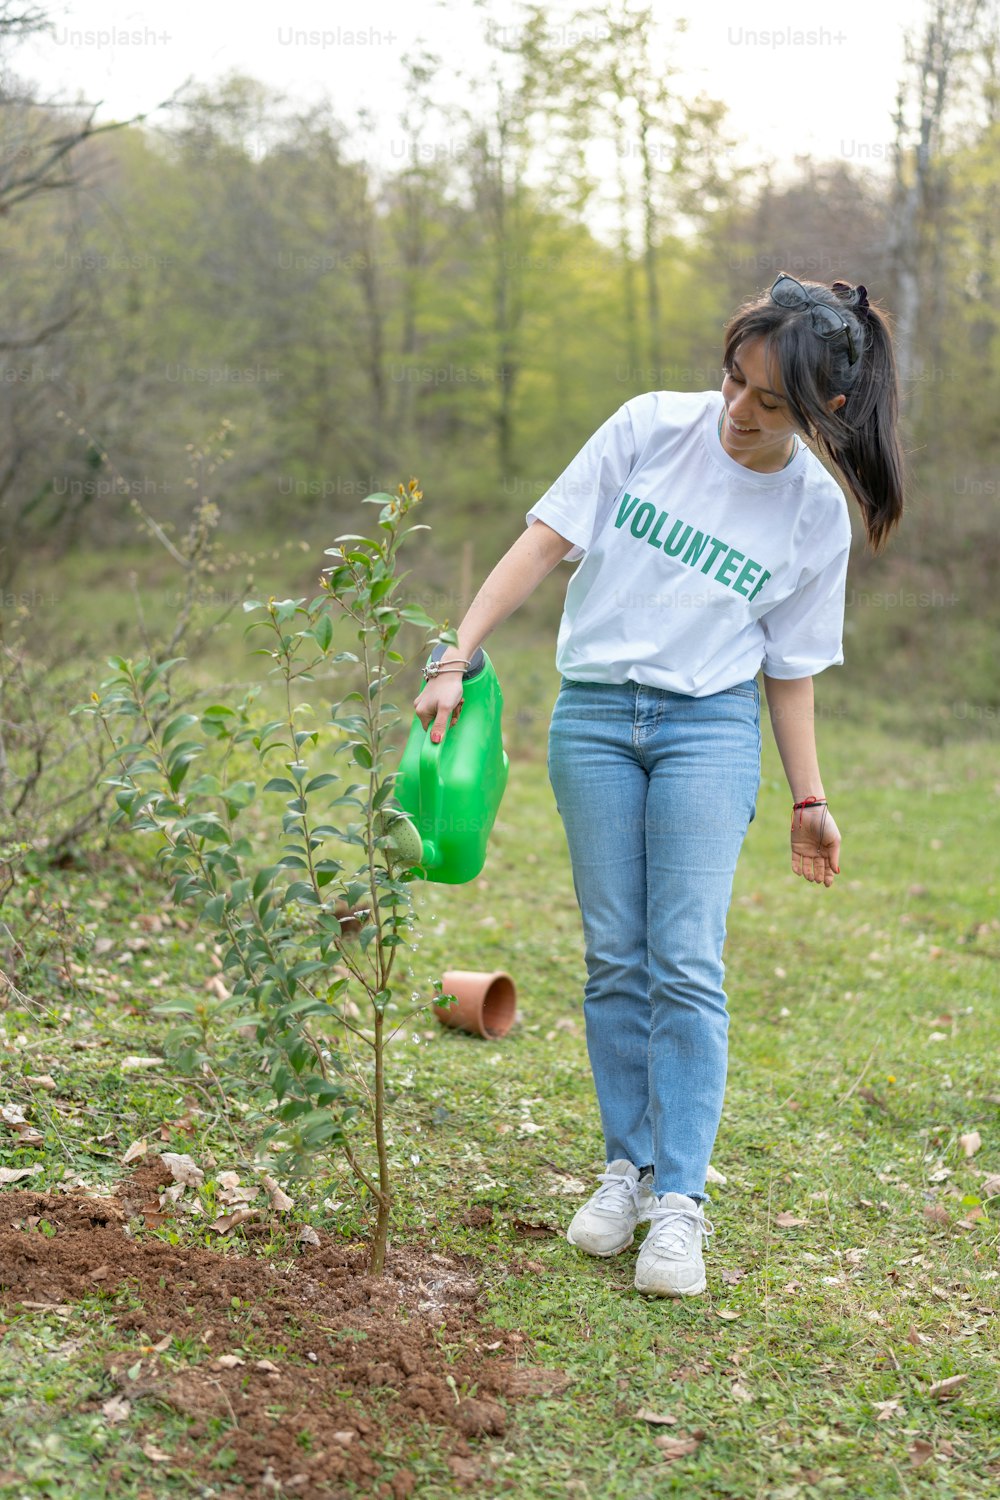 a woman watering a tree with a green watering can